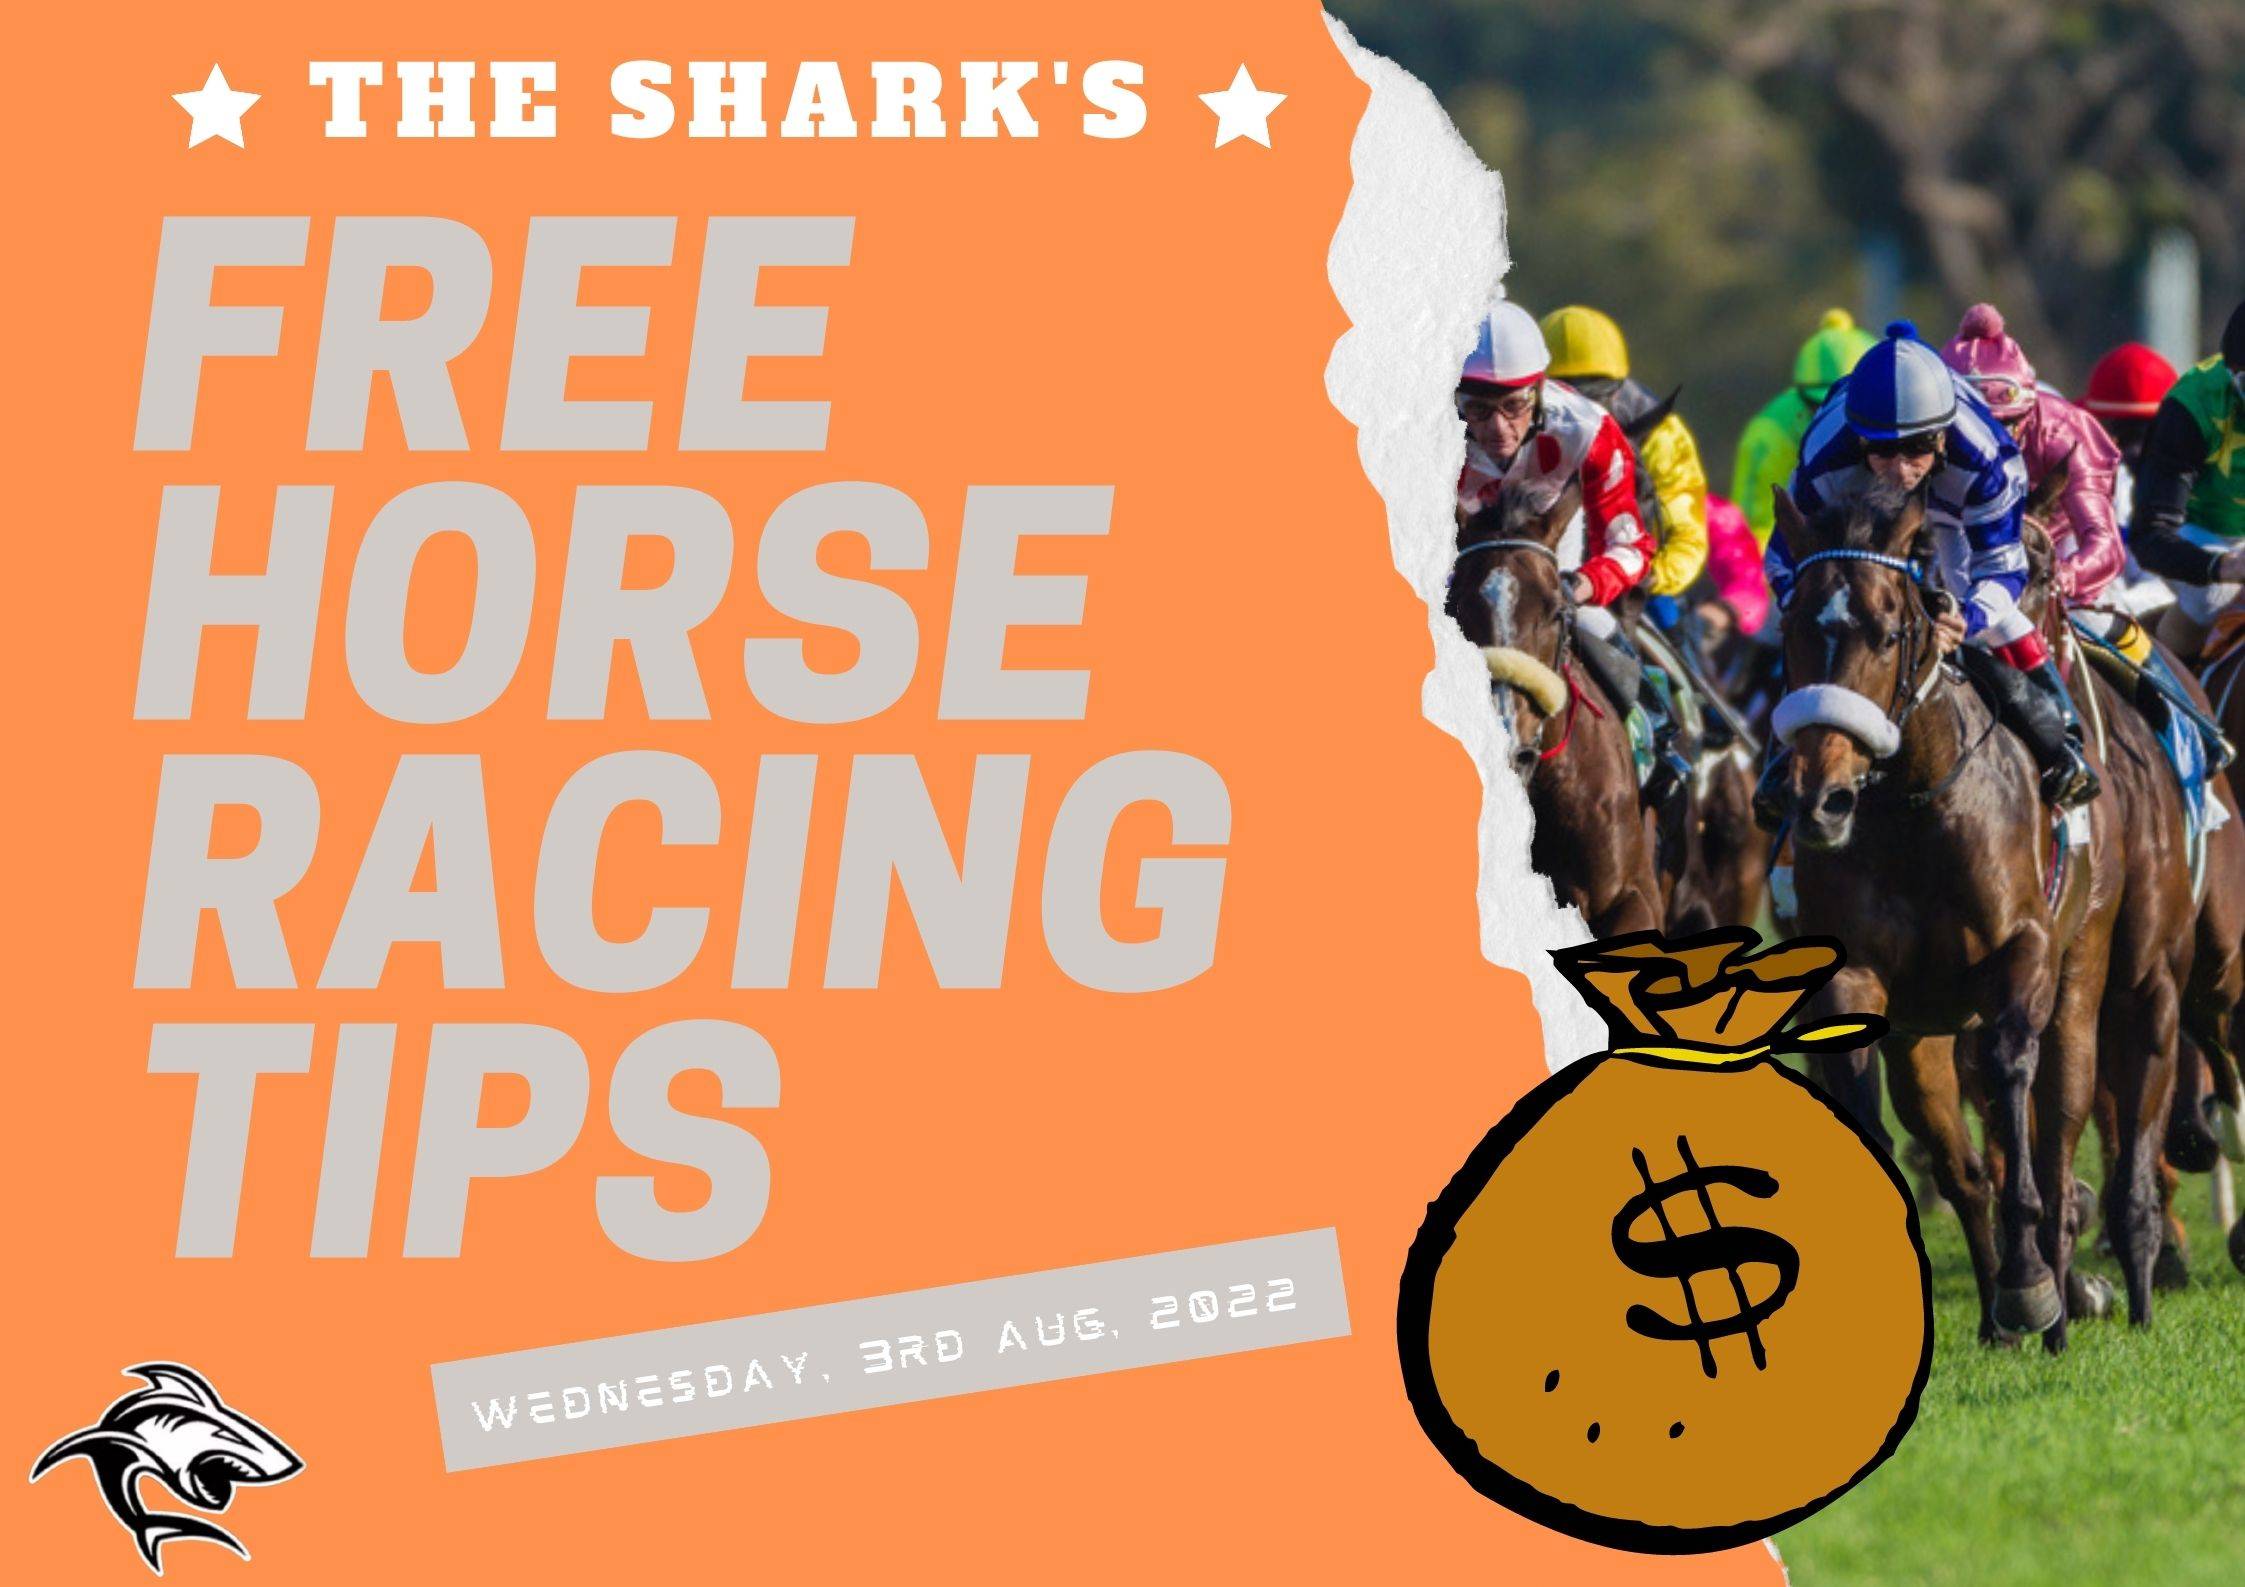 Free Horse Racing Tips - 3rd Aug